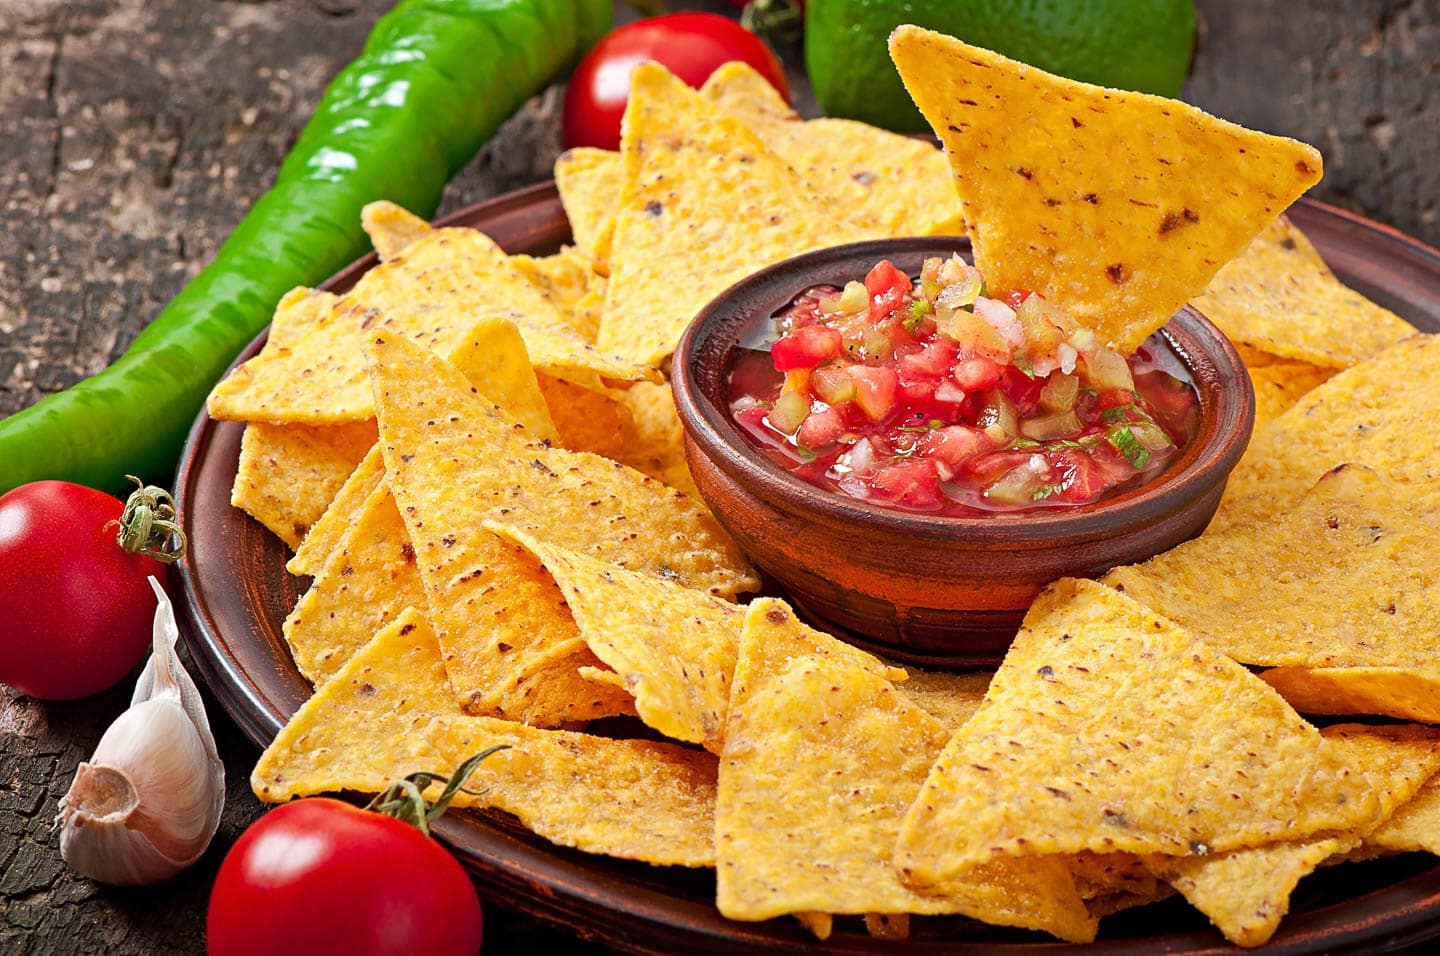 chip dipped in a bowl of Pico de gallo that is surrounded by chips, tomatoes, garlic and chile peppers.